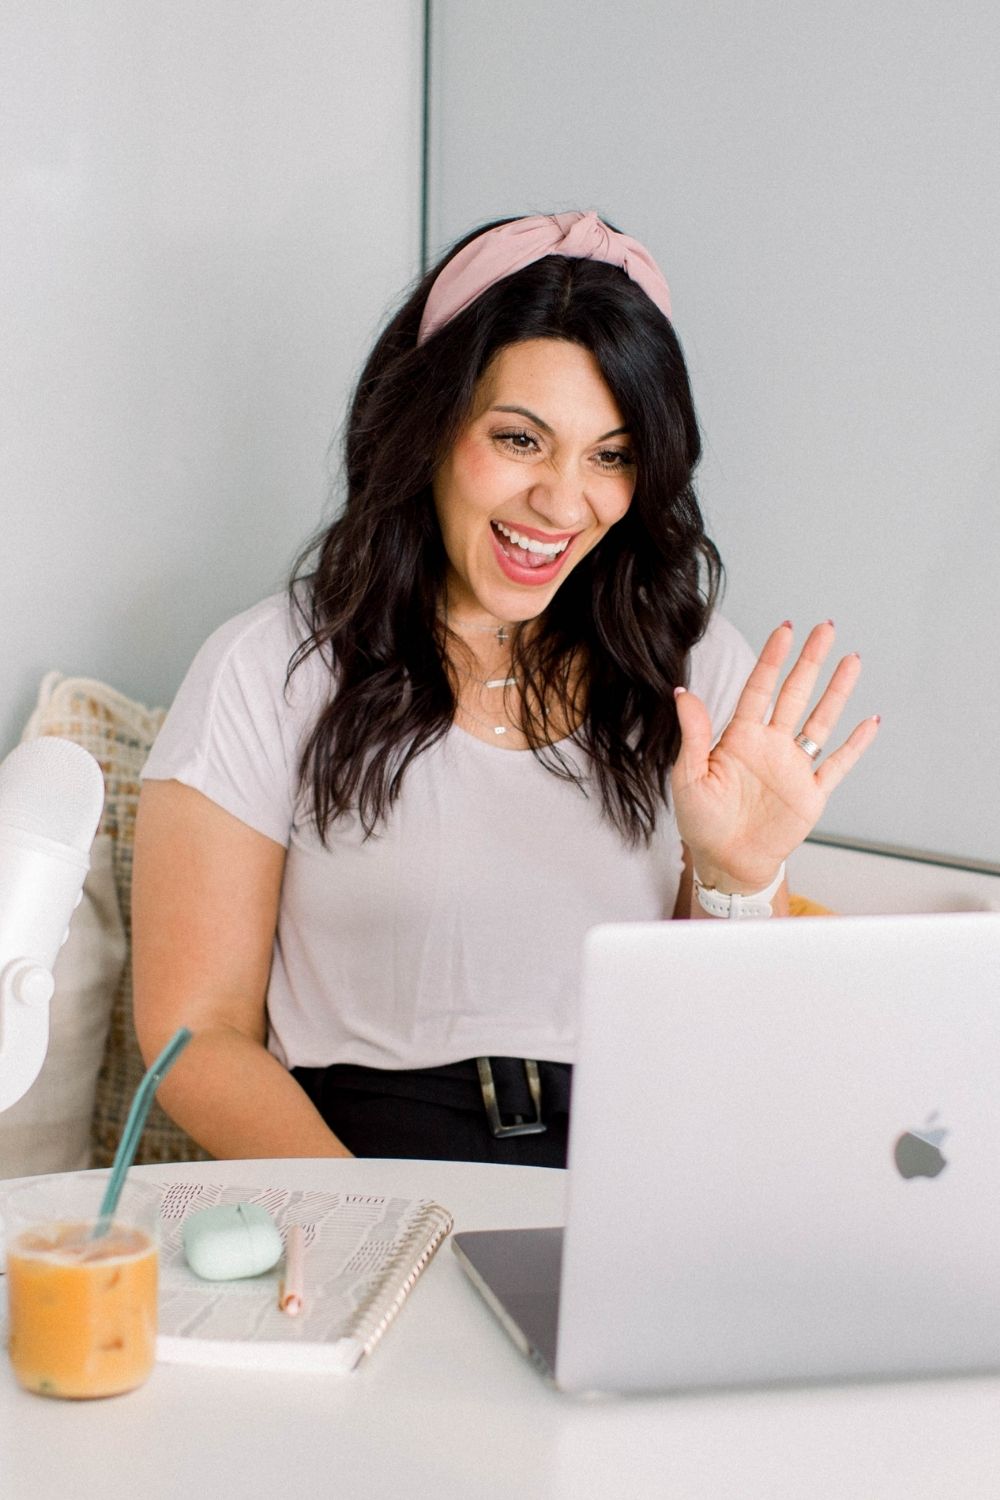 dark haired lady sitting on a sofa with a pink head back and a white t shirt. She is smiling and waving into a laptop on a table in front of her. There is also a glass of orange juice with a straw in it on the table.